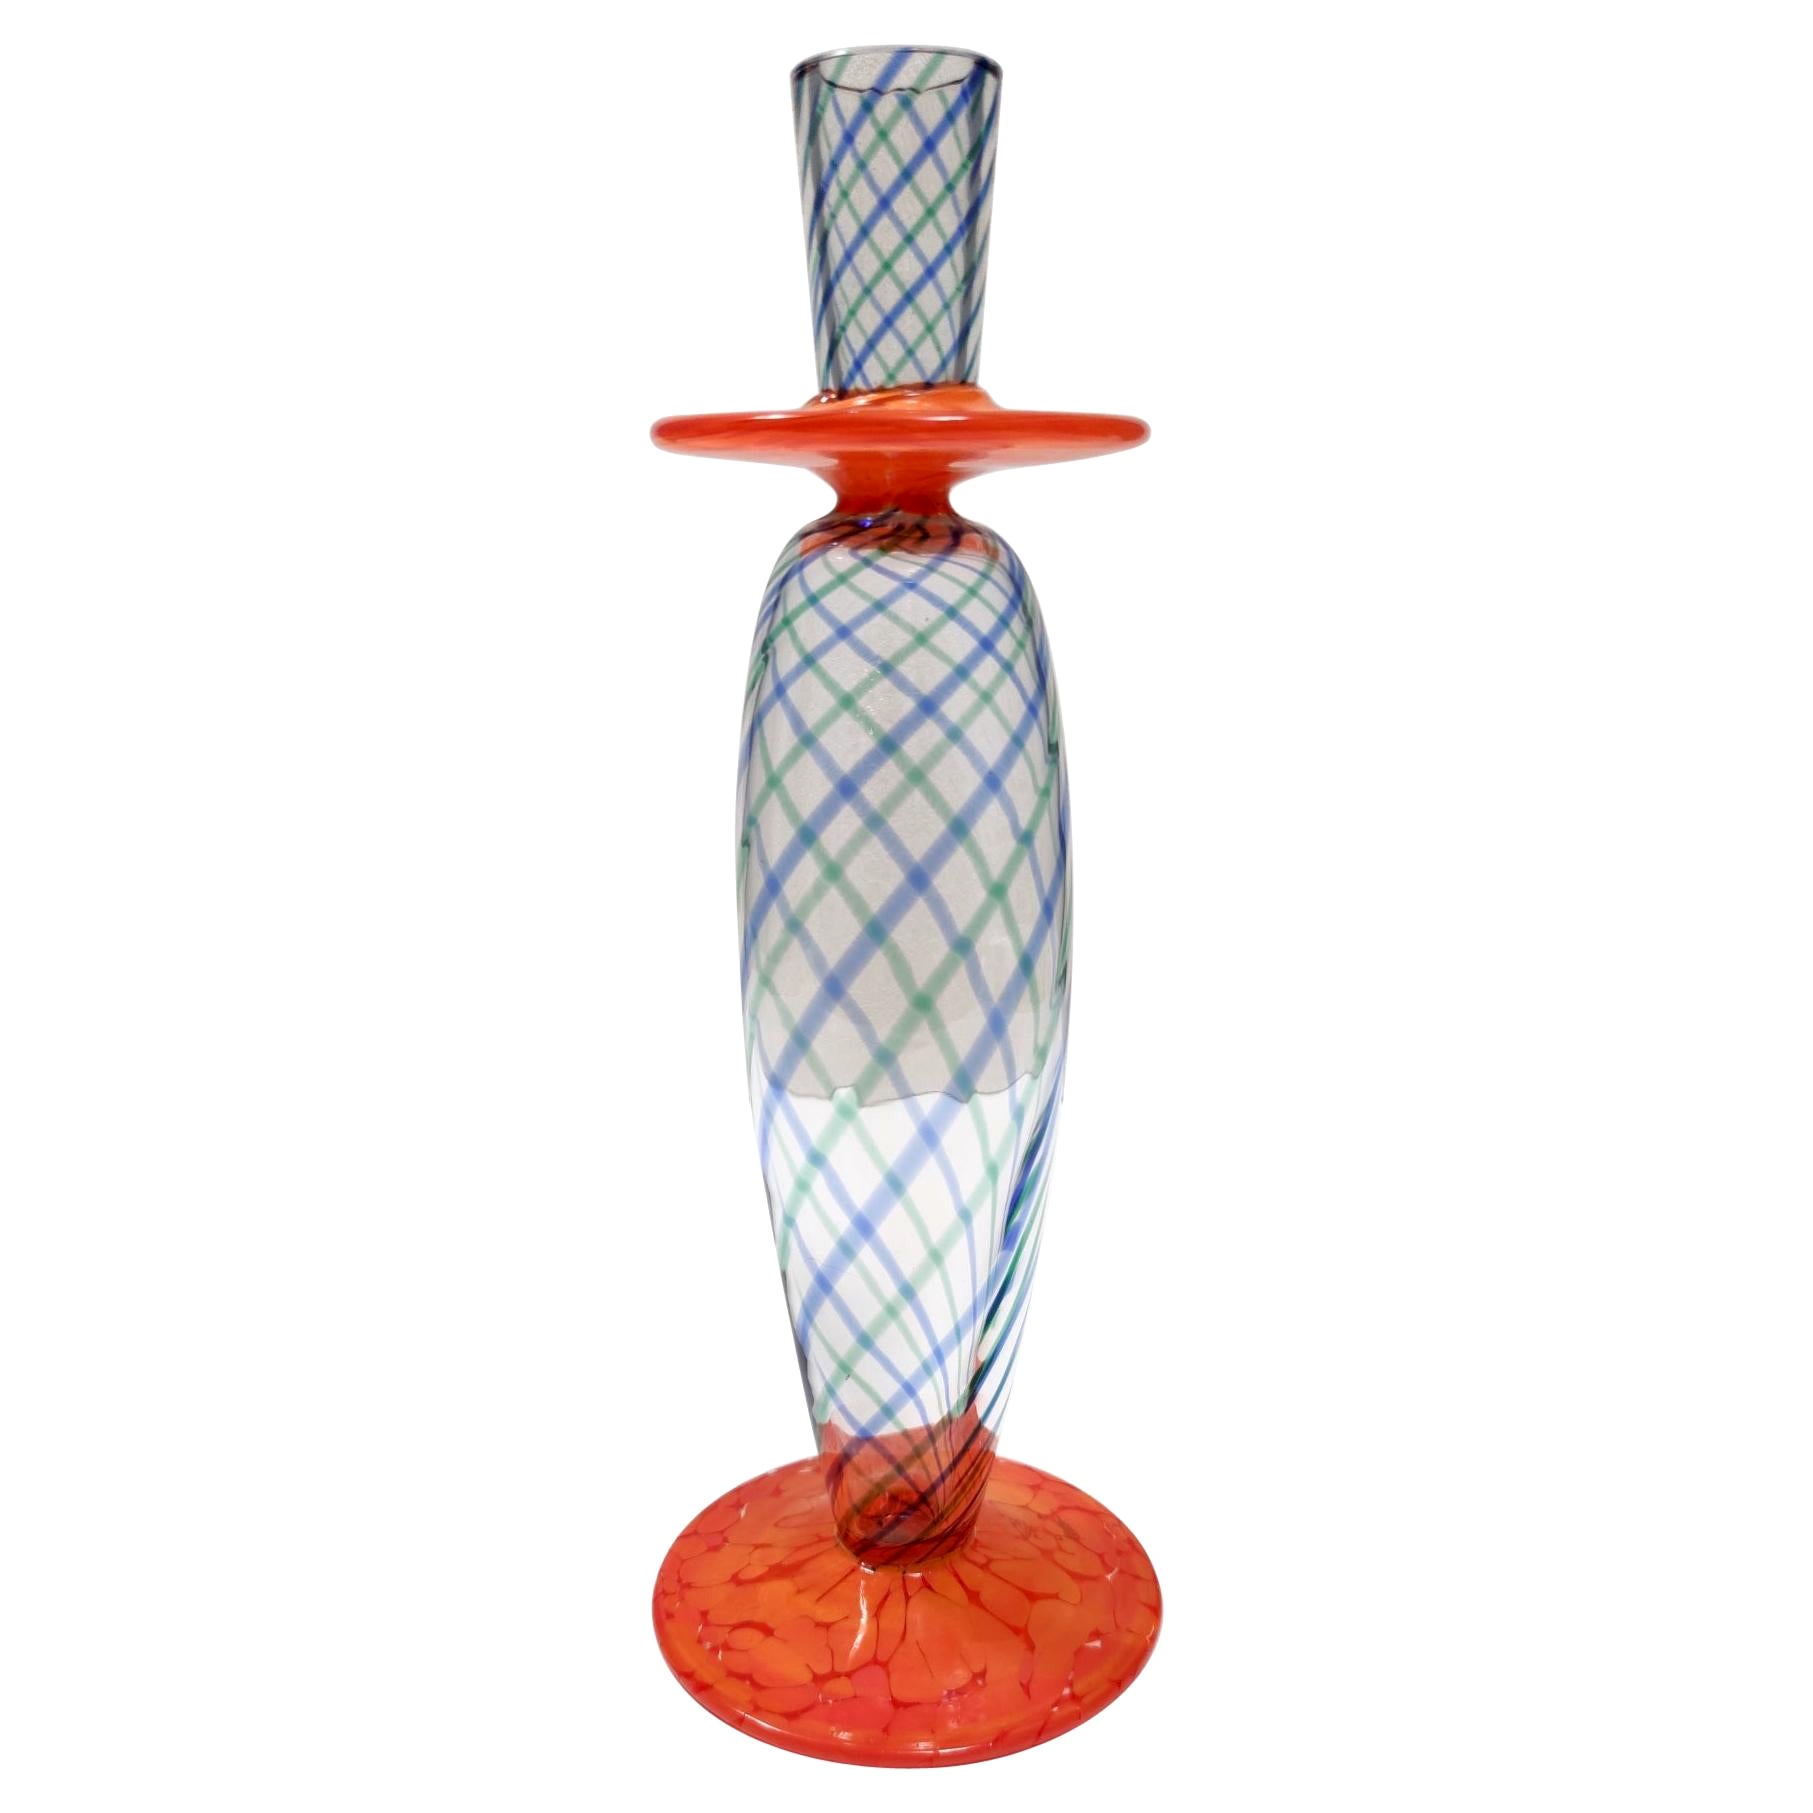 High-Quality Murano Glass Candleholder by Carlo Moretti, Italy, 1999